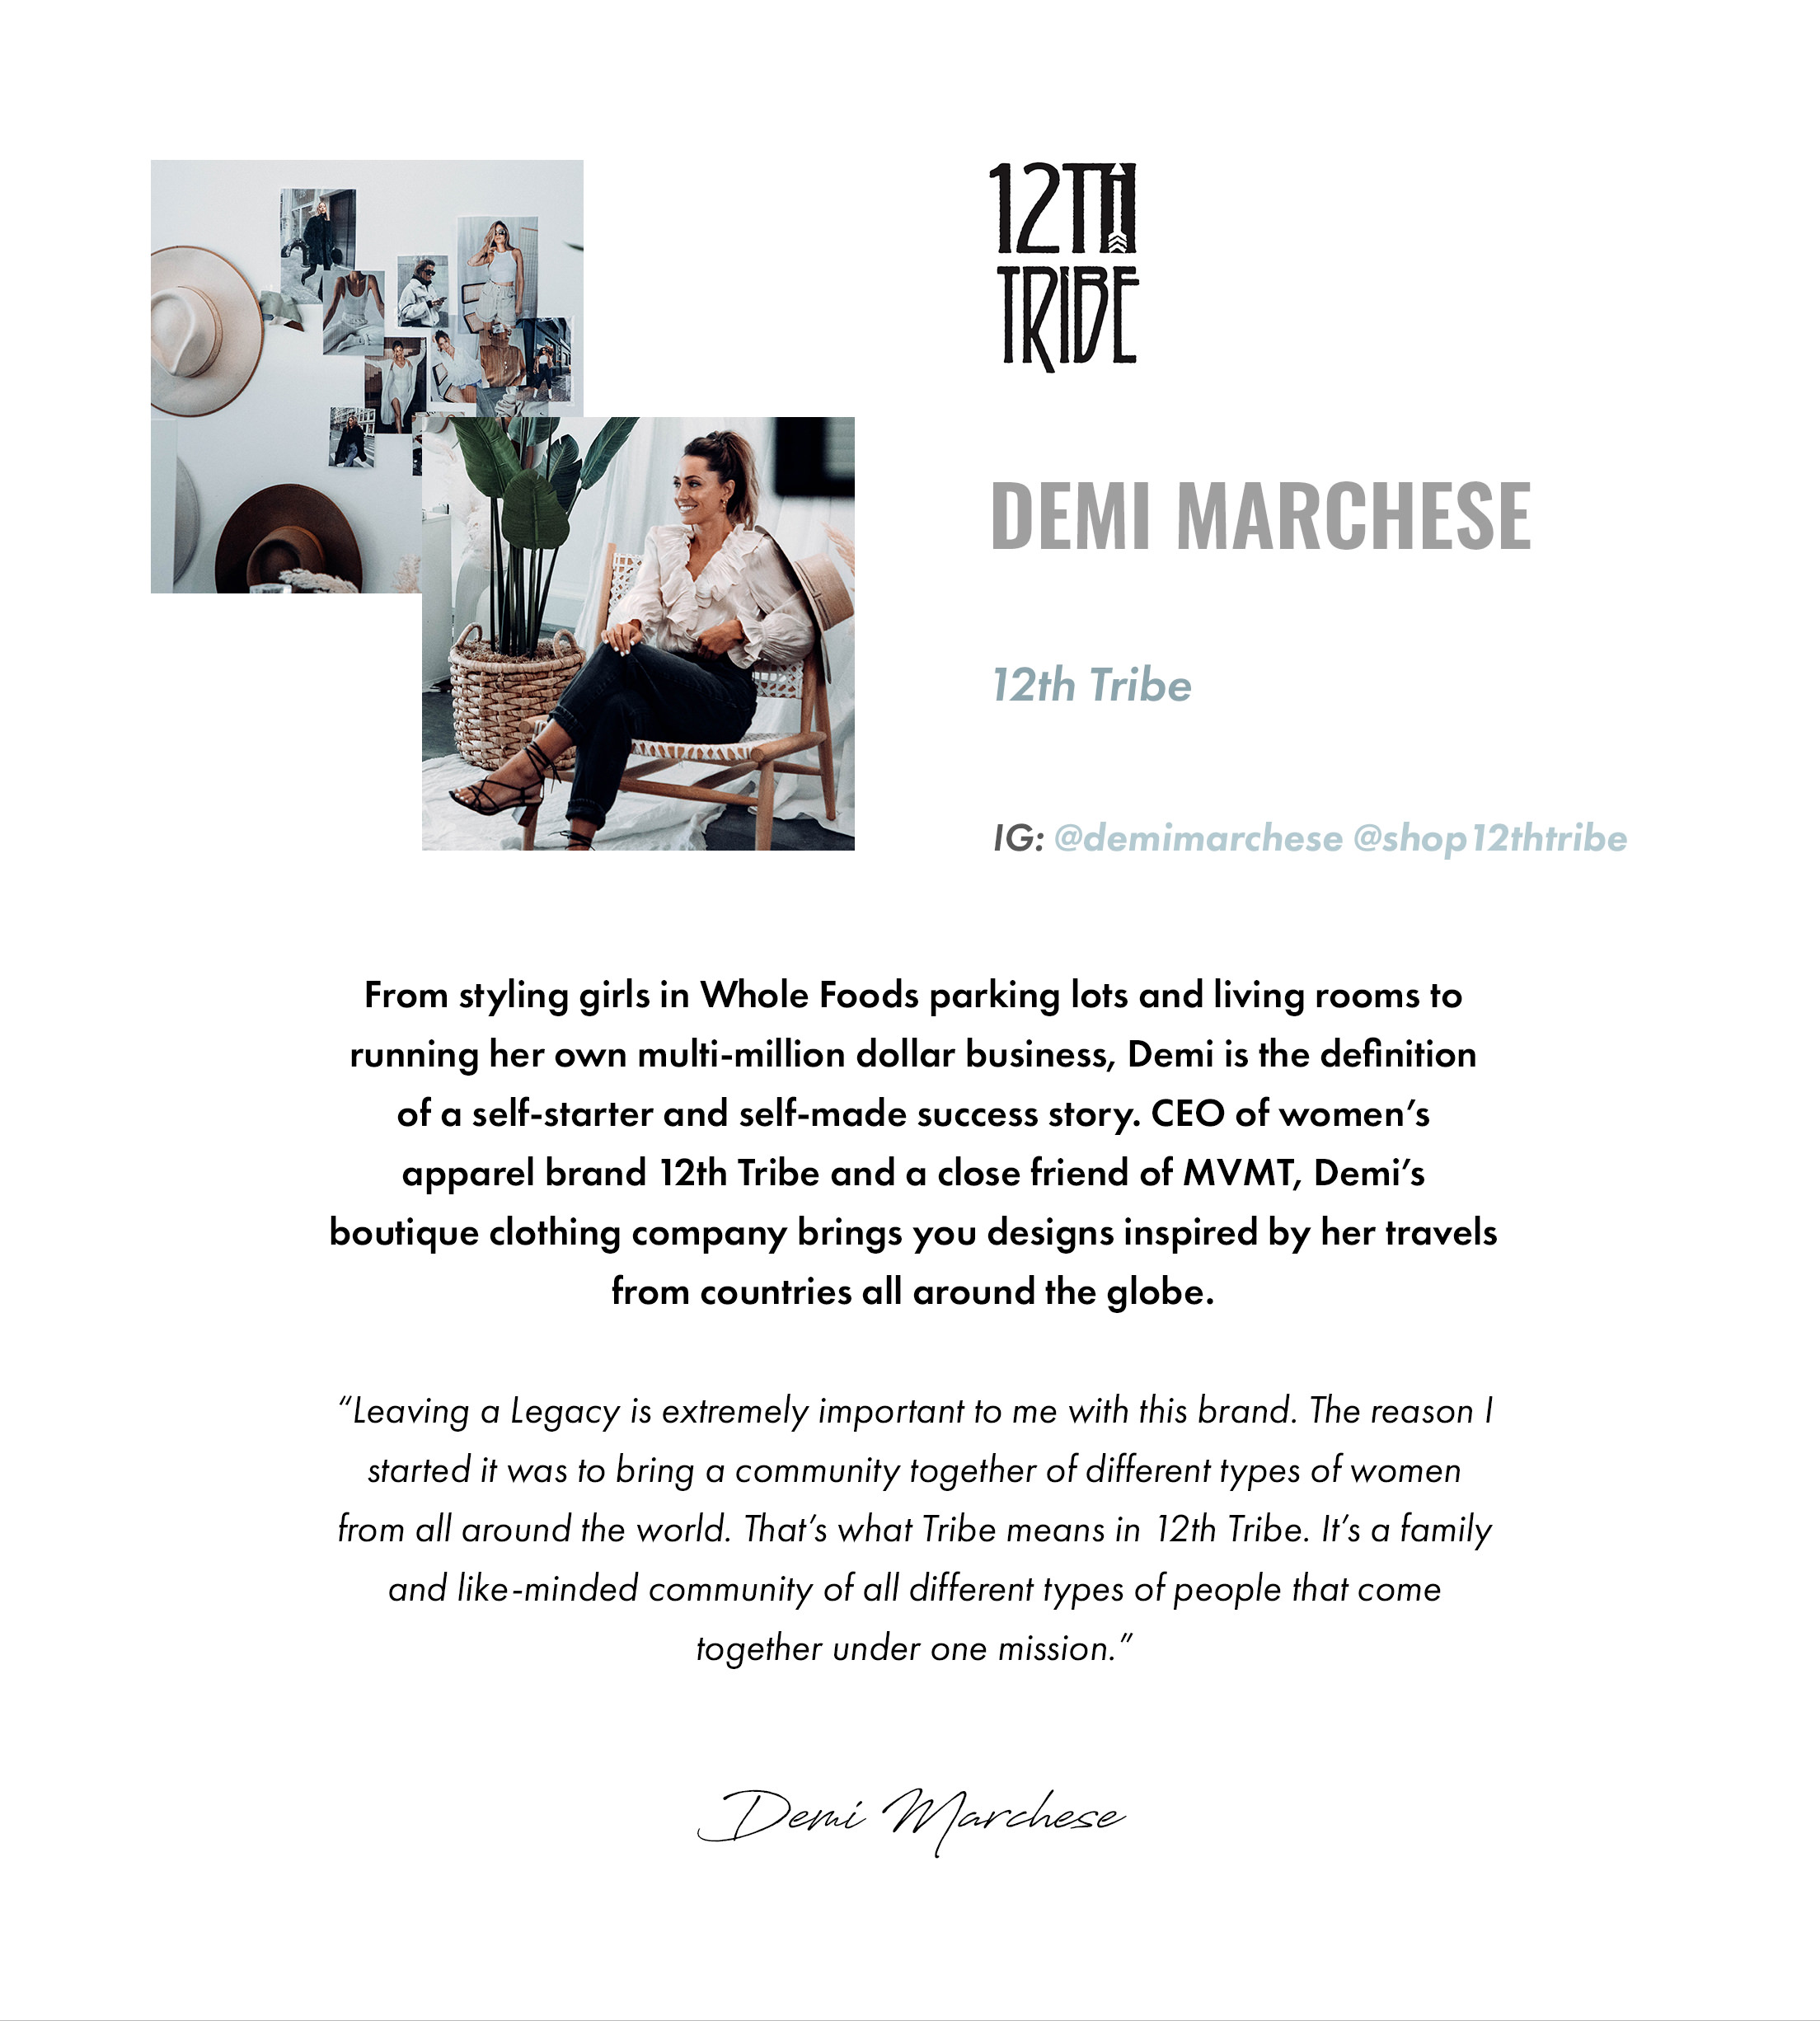 Demi Marchese. 12th Tribe. IG: @demimarchese @shop12thtribe. From styling girls in Whole Foods parking lots and living rooms to running her own multi-million dollar business, Demi is the definition of a self-starter and self-made success story. CEO of women's apparel brand 12th Tribe and a close friend of MVMT, Demi's boutique clothing company brings you designs inspired by her travels from countries all around the globe. "Leaving a Legacy is extremely important to me with this brand. The reason I started it was to bring a community together of different types of women from all around the world. That's what Tribe means in 12th Tribe. It's a family and like-minded community of all different types of people that come together under one mission." -Demi Marchese